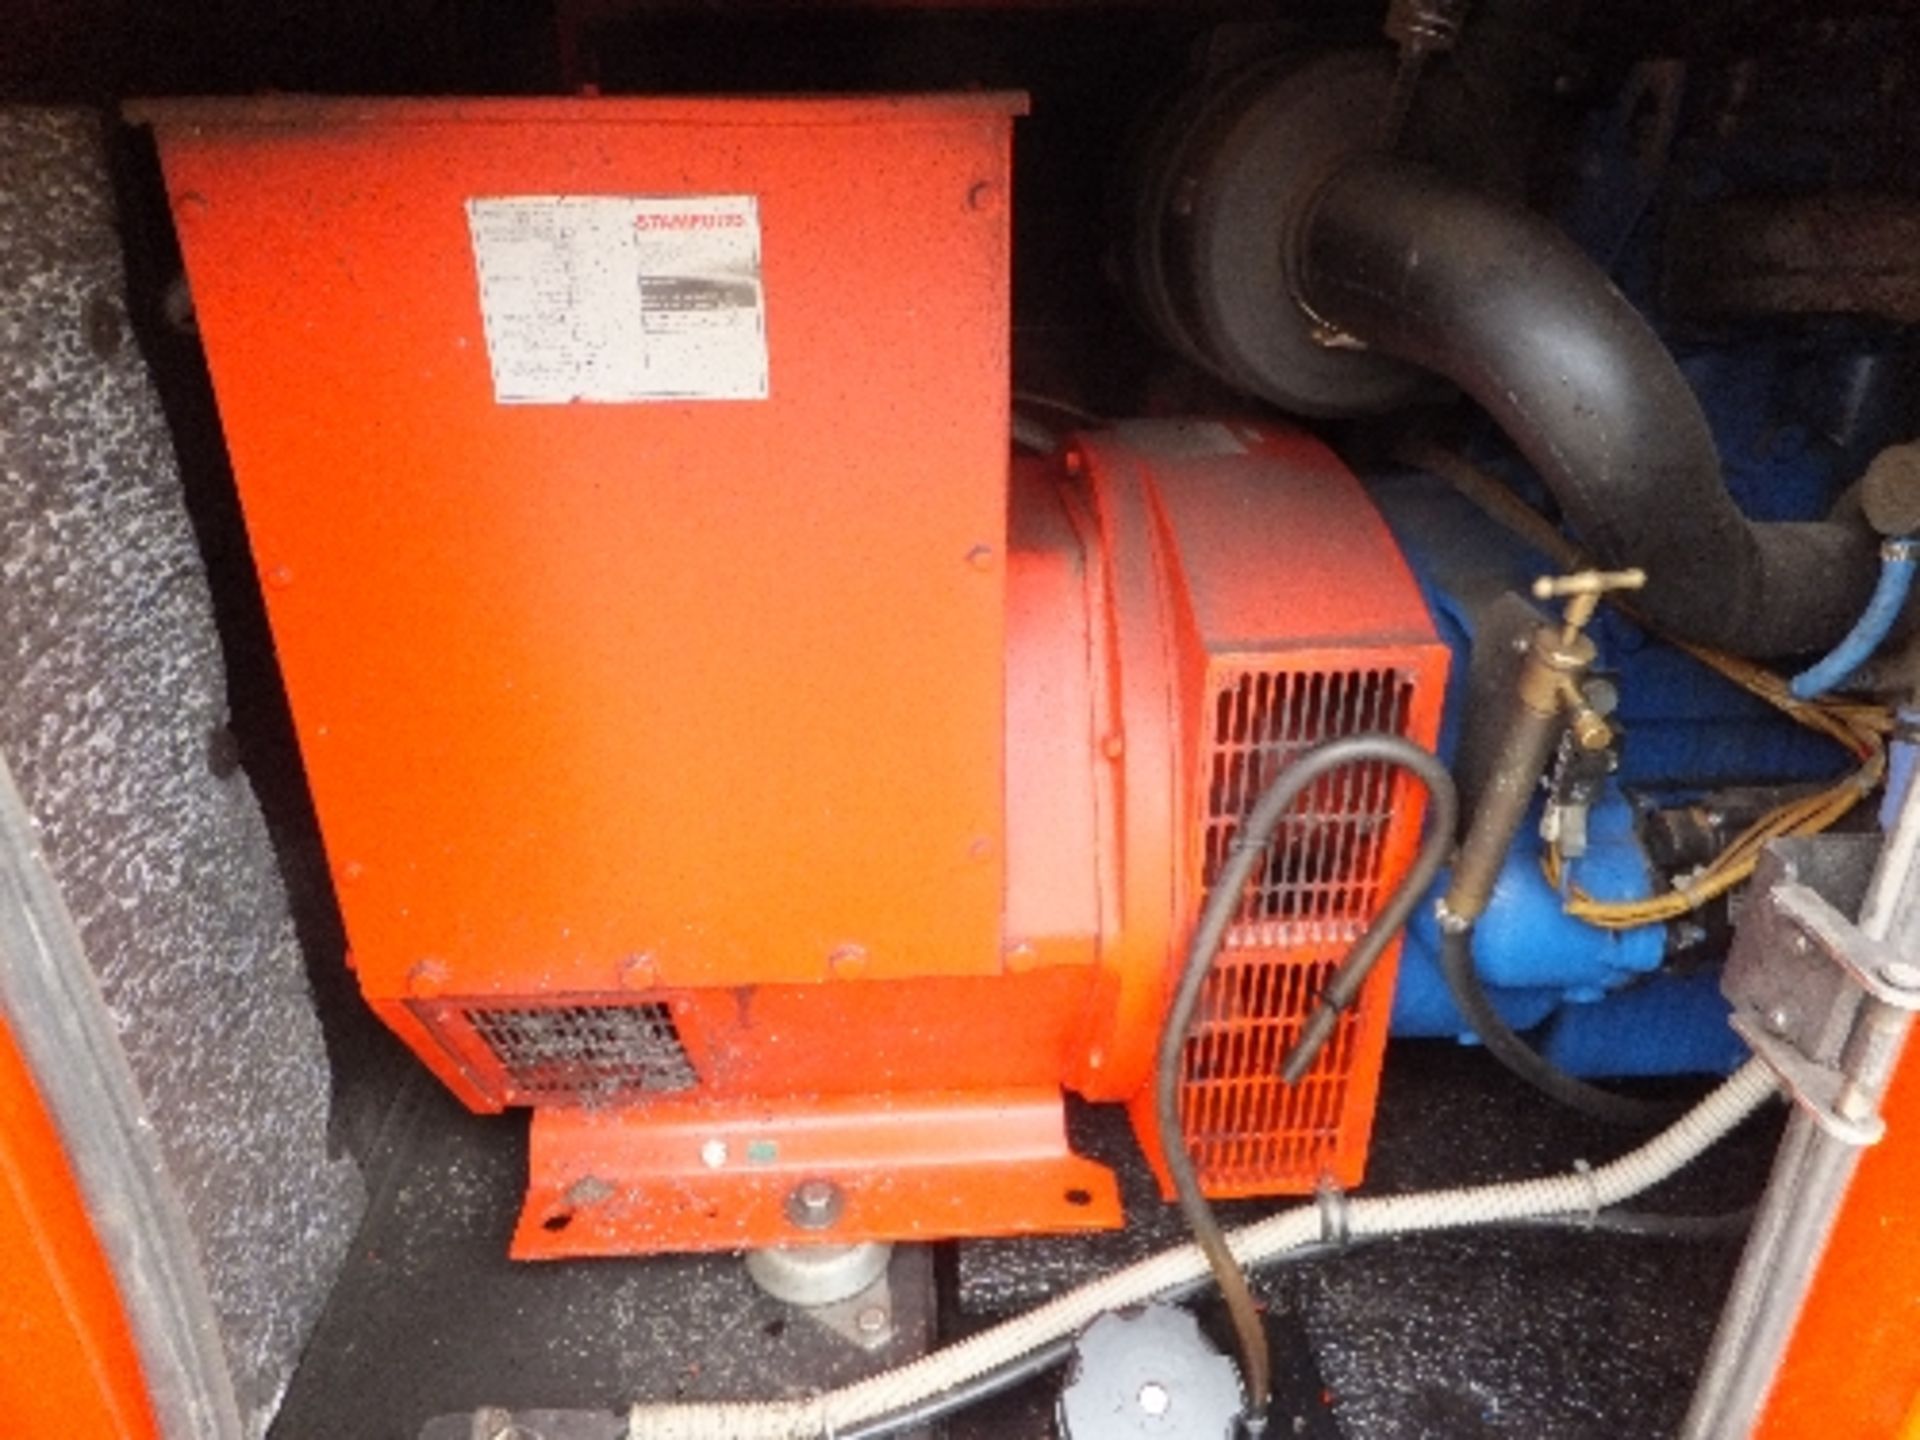 Genset MG115SS-P 100kva generator
Complete - parts of panel missing
HF6109 - Image 2 of 4